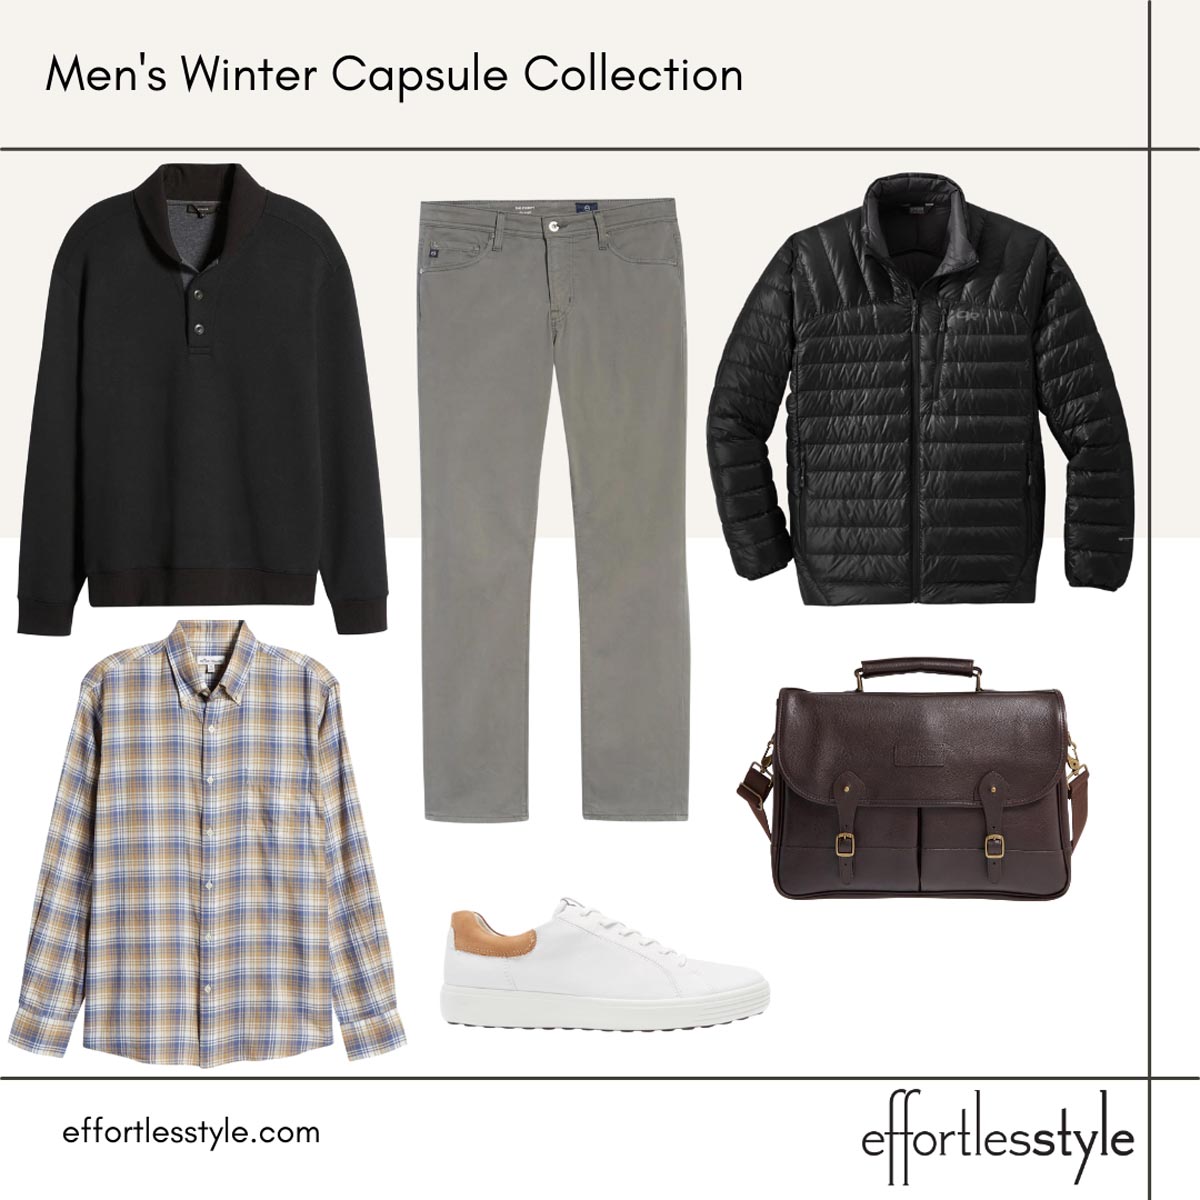 Men's Winter Capsule Collection Styled looks shawl collar sweater how to wear a shawl collar sweater shawl collar sweater outfits for men how to wear a sweater with sneakers men's messenger bag